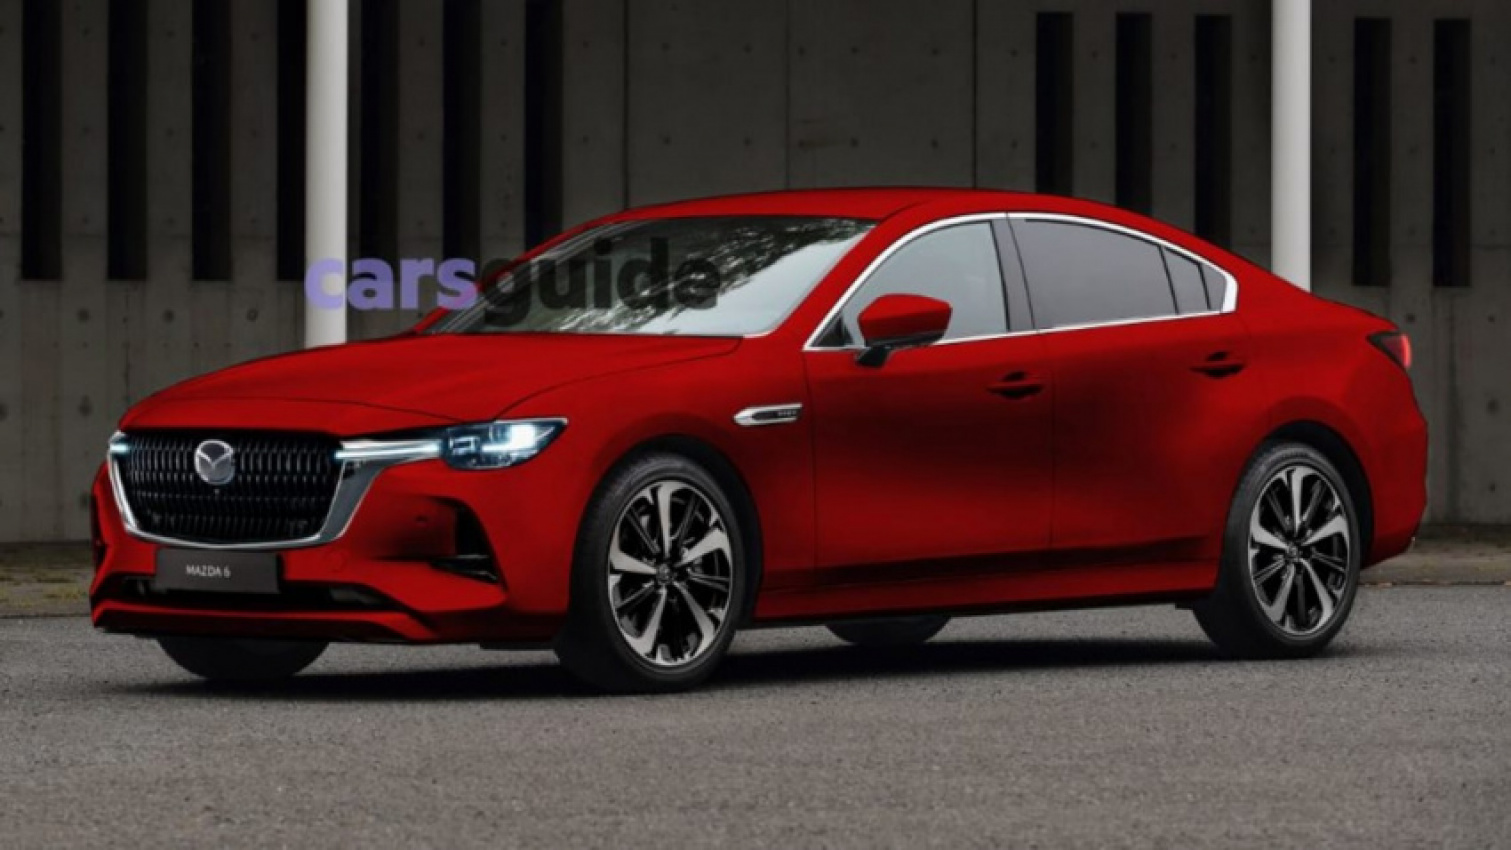 autos, cars, mazda, toyota, camry, toyota camry, the commodore curse strikes again? why you shouldn't hold your breath for an all-new mazda6 as mid-size toyota camry rival slips down priorities list